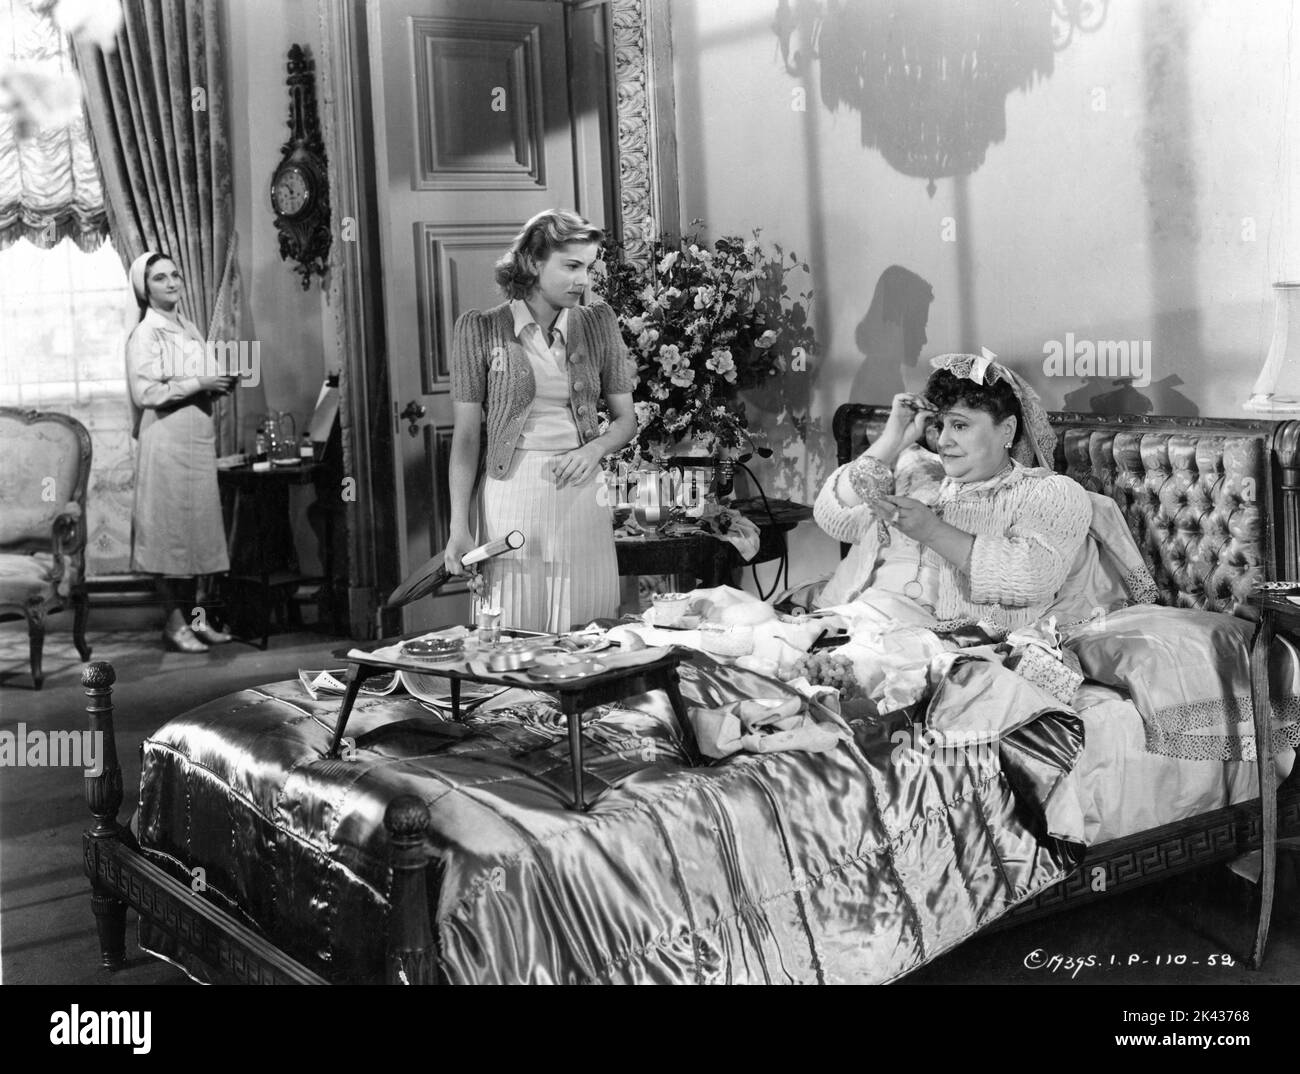 JOAN FONTAINE and FLORENCE BATES as Mrs. Van Hopper in REBECCA 1940 director ALFRED HITCHCOCK novel Daphne Du Maurier producer David O. Selznick Selznick International Pictures / United Artists Stock Photo